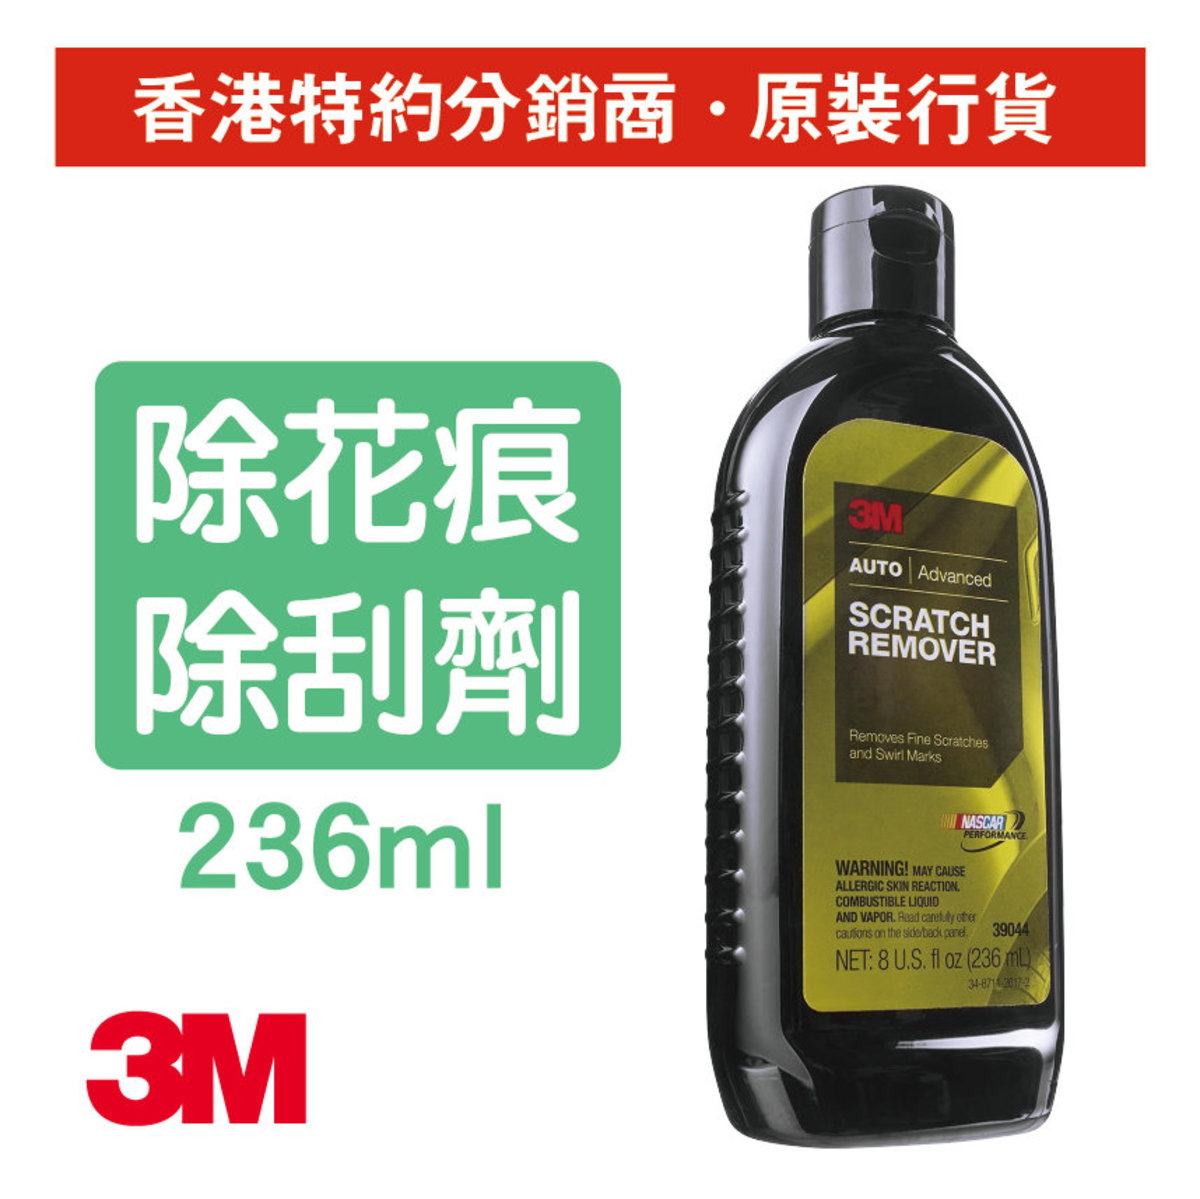 3M Scratch Remover, Rubbing Compound and High Performance Synthetic Wax